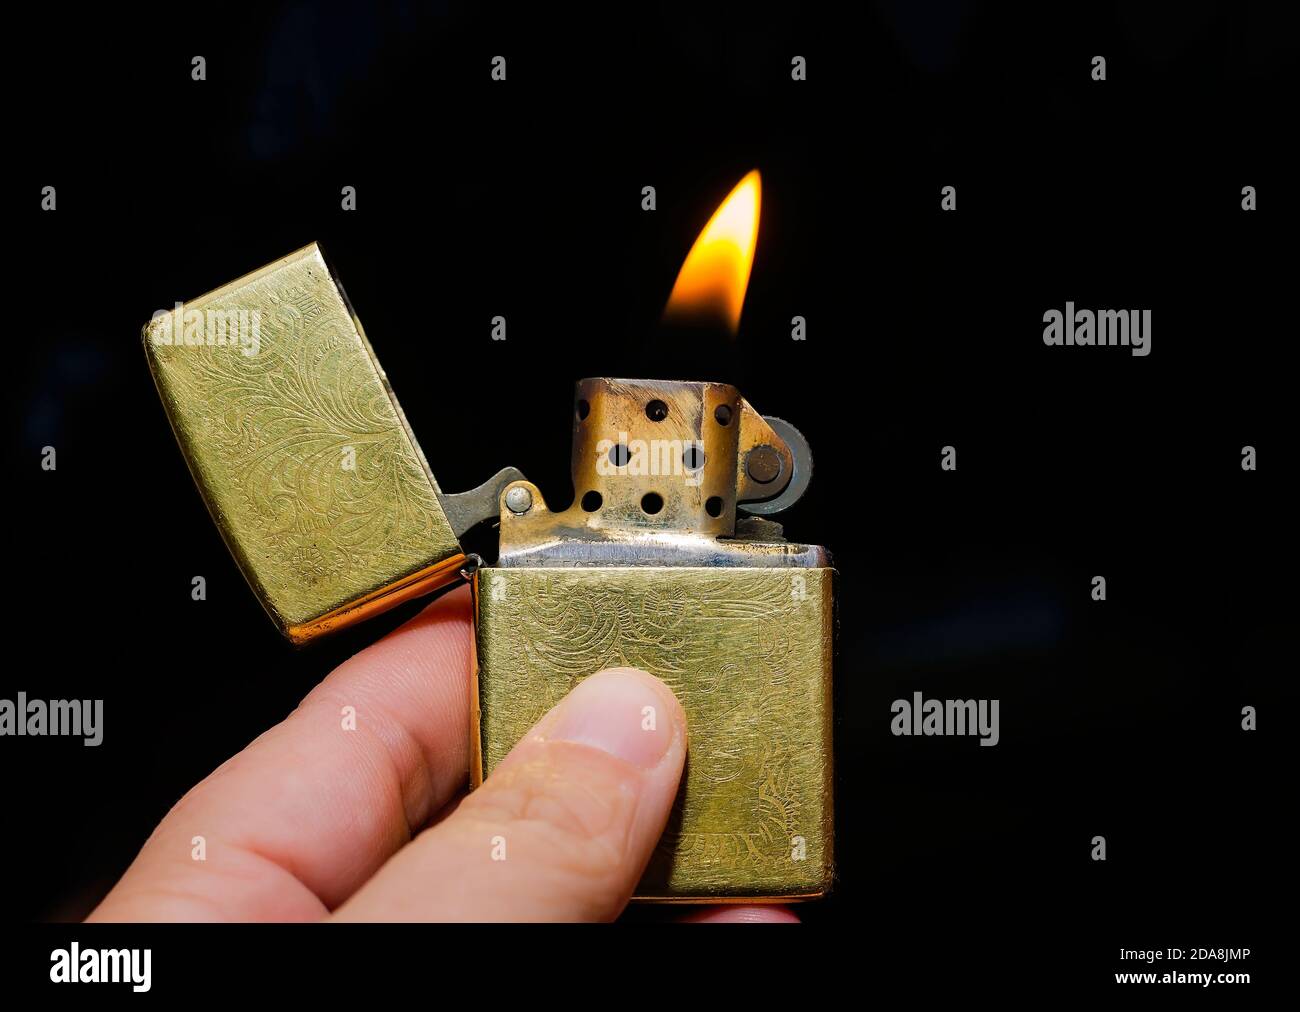 A hand holds a Venetian gold Zippo lighter open and lit. Zippo lighters are reusable metal lighters manufactured by American Zippo Manufacturing. Stock Photo